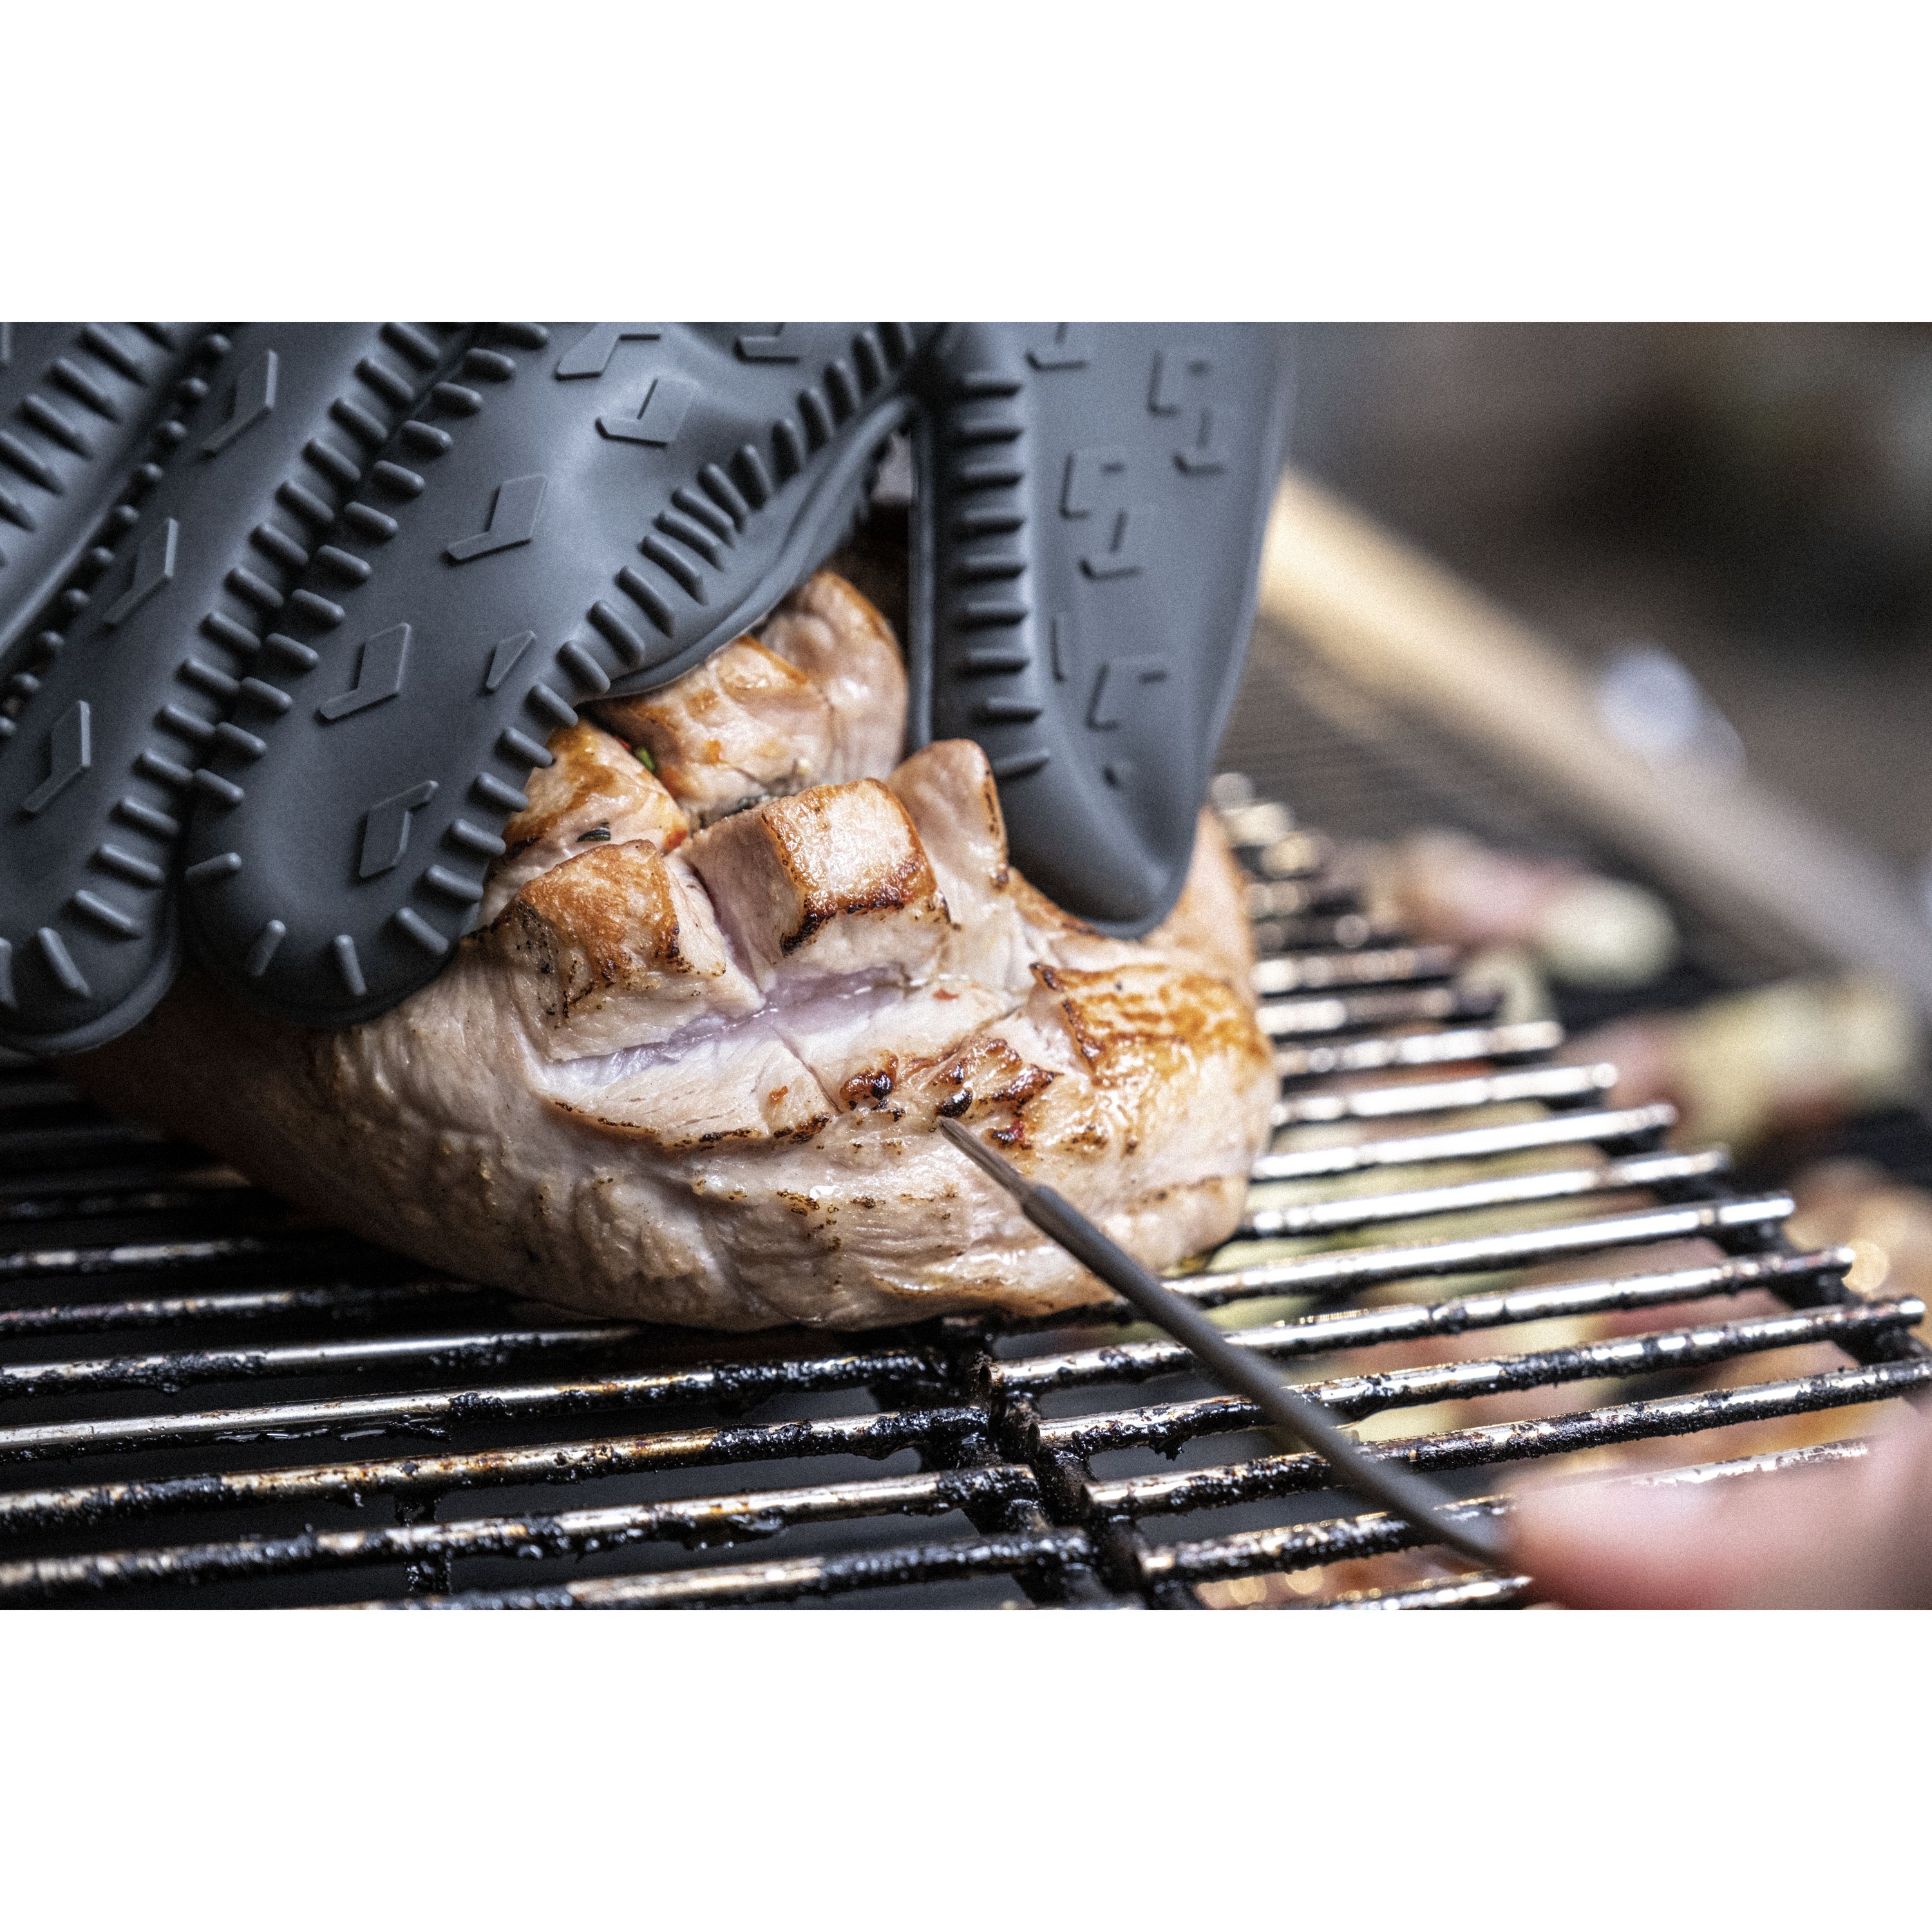 Shoppers Love The Kizen Digital Meat Thermometer for Grilling